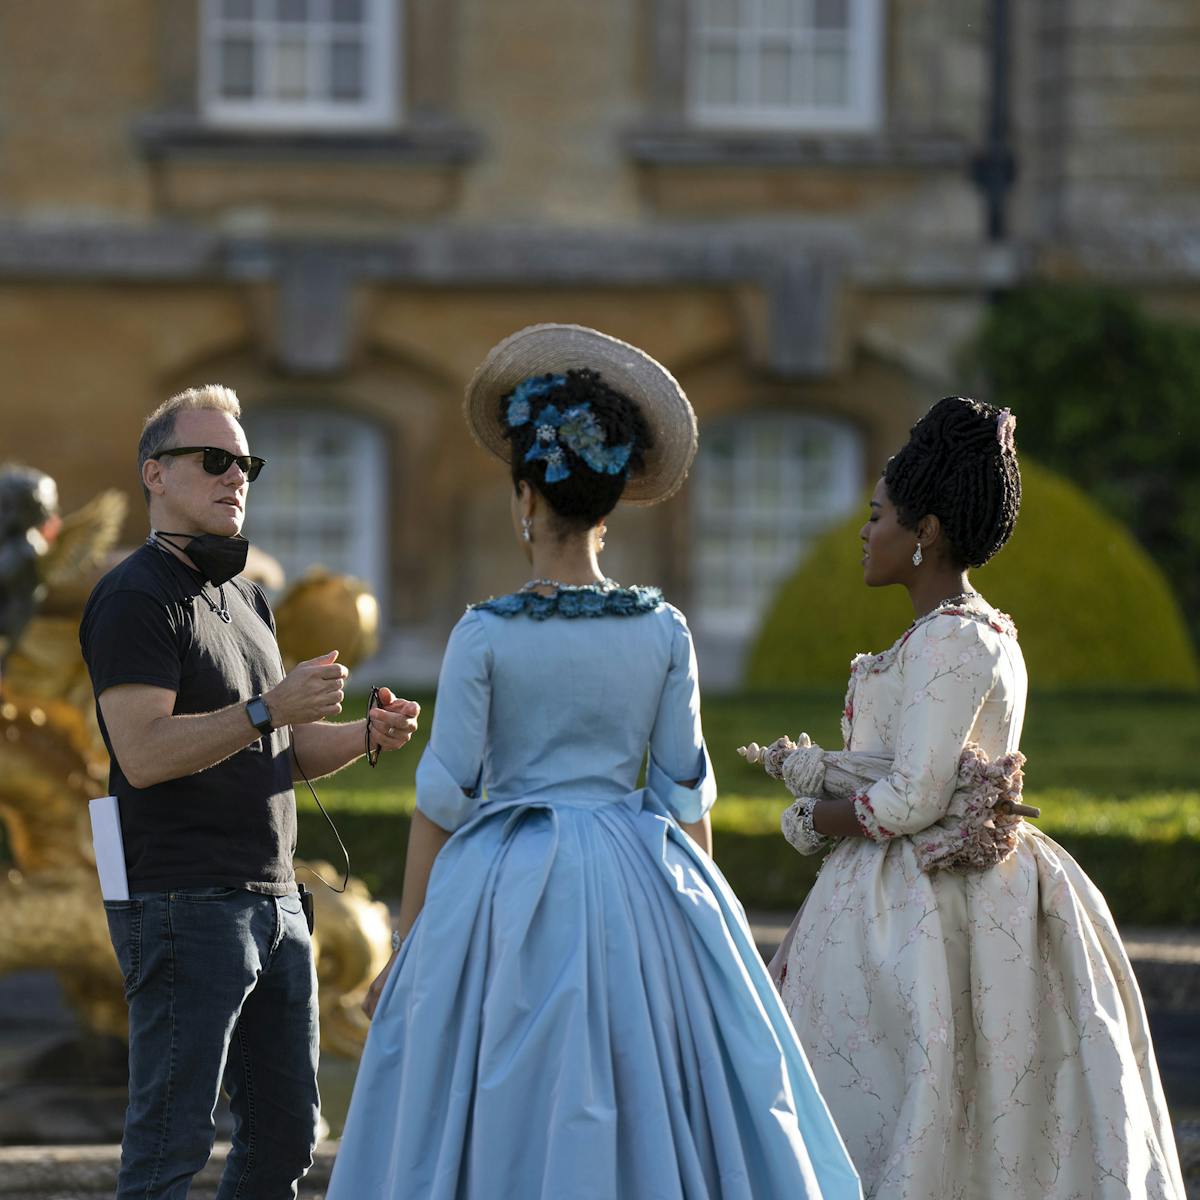 Tom Verica, India Amarteifio, and Arsema Thomas stand around on set. Amarteifio wears a blue dress and headpiece, Arsema wears white, and Verica wears black with matching shades.